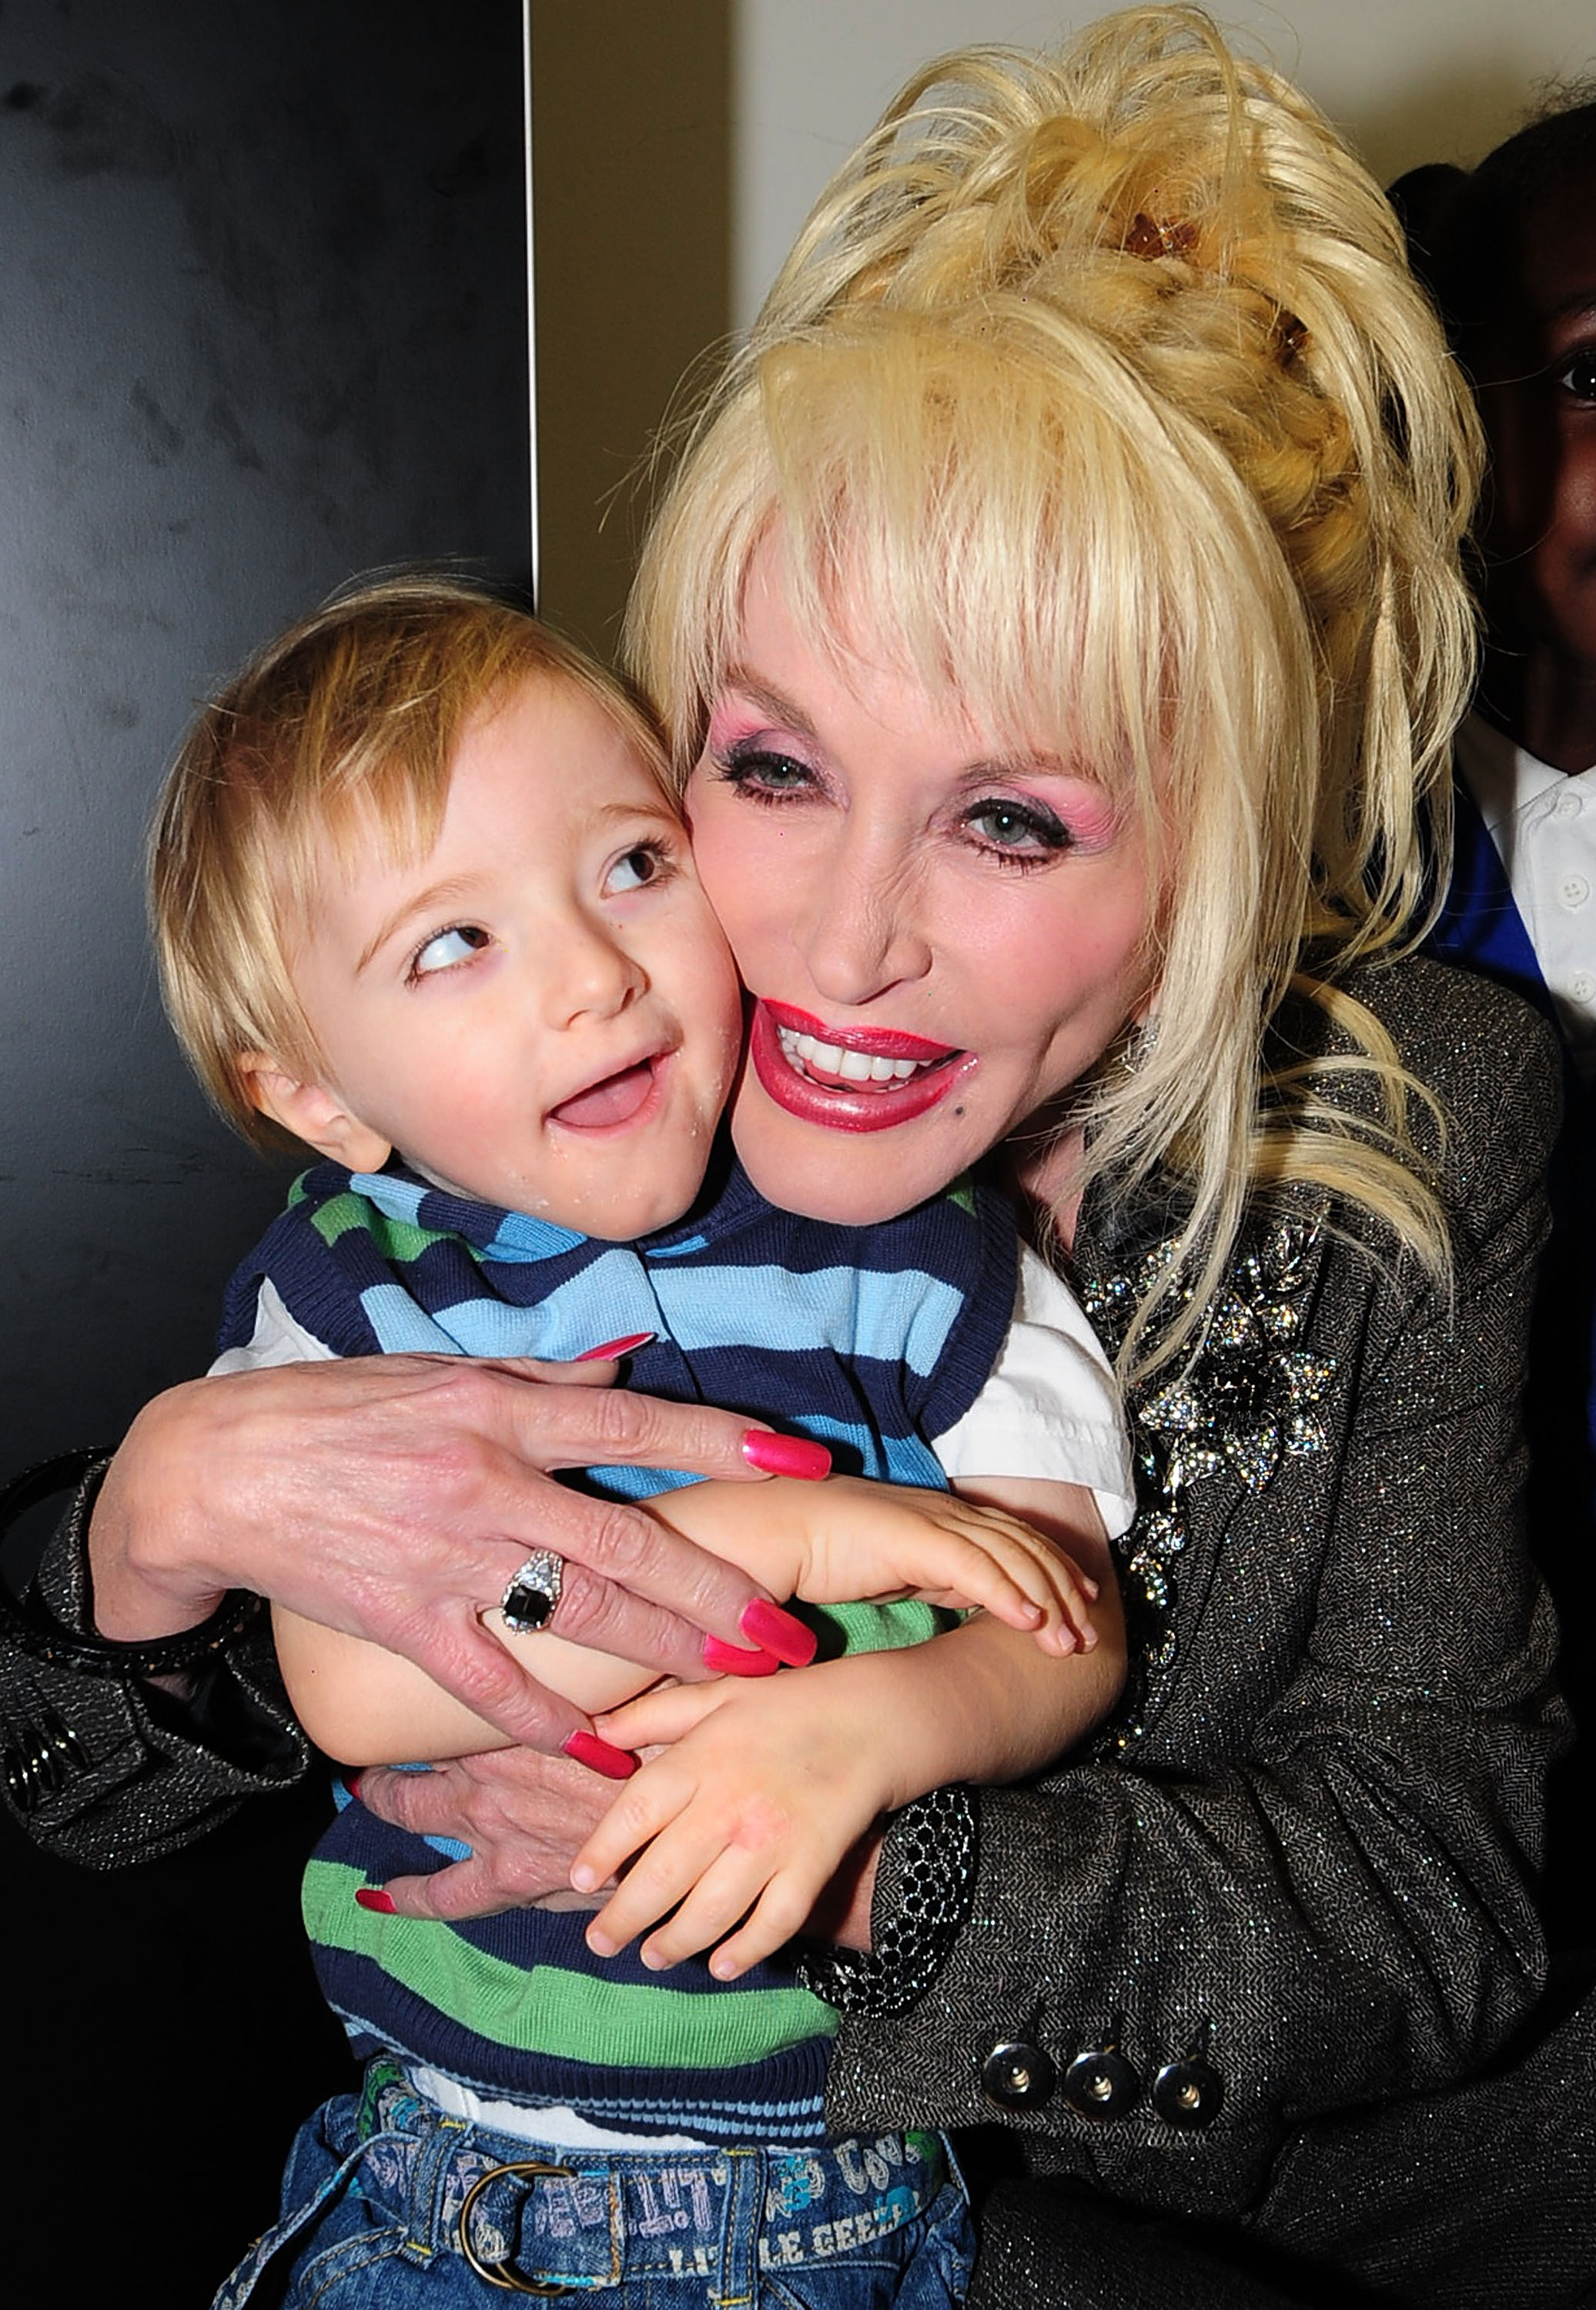 Dolly Parton meets a young child at the Magna Science and Adventure Park in Rotherham, South Yorkshire, England, on December 5, 2007. | Source: Getty Images